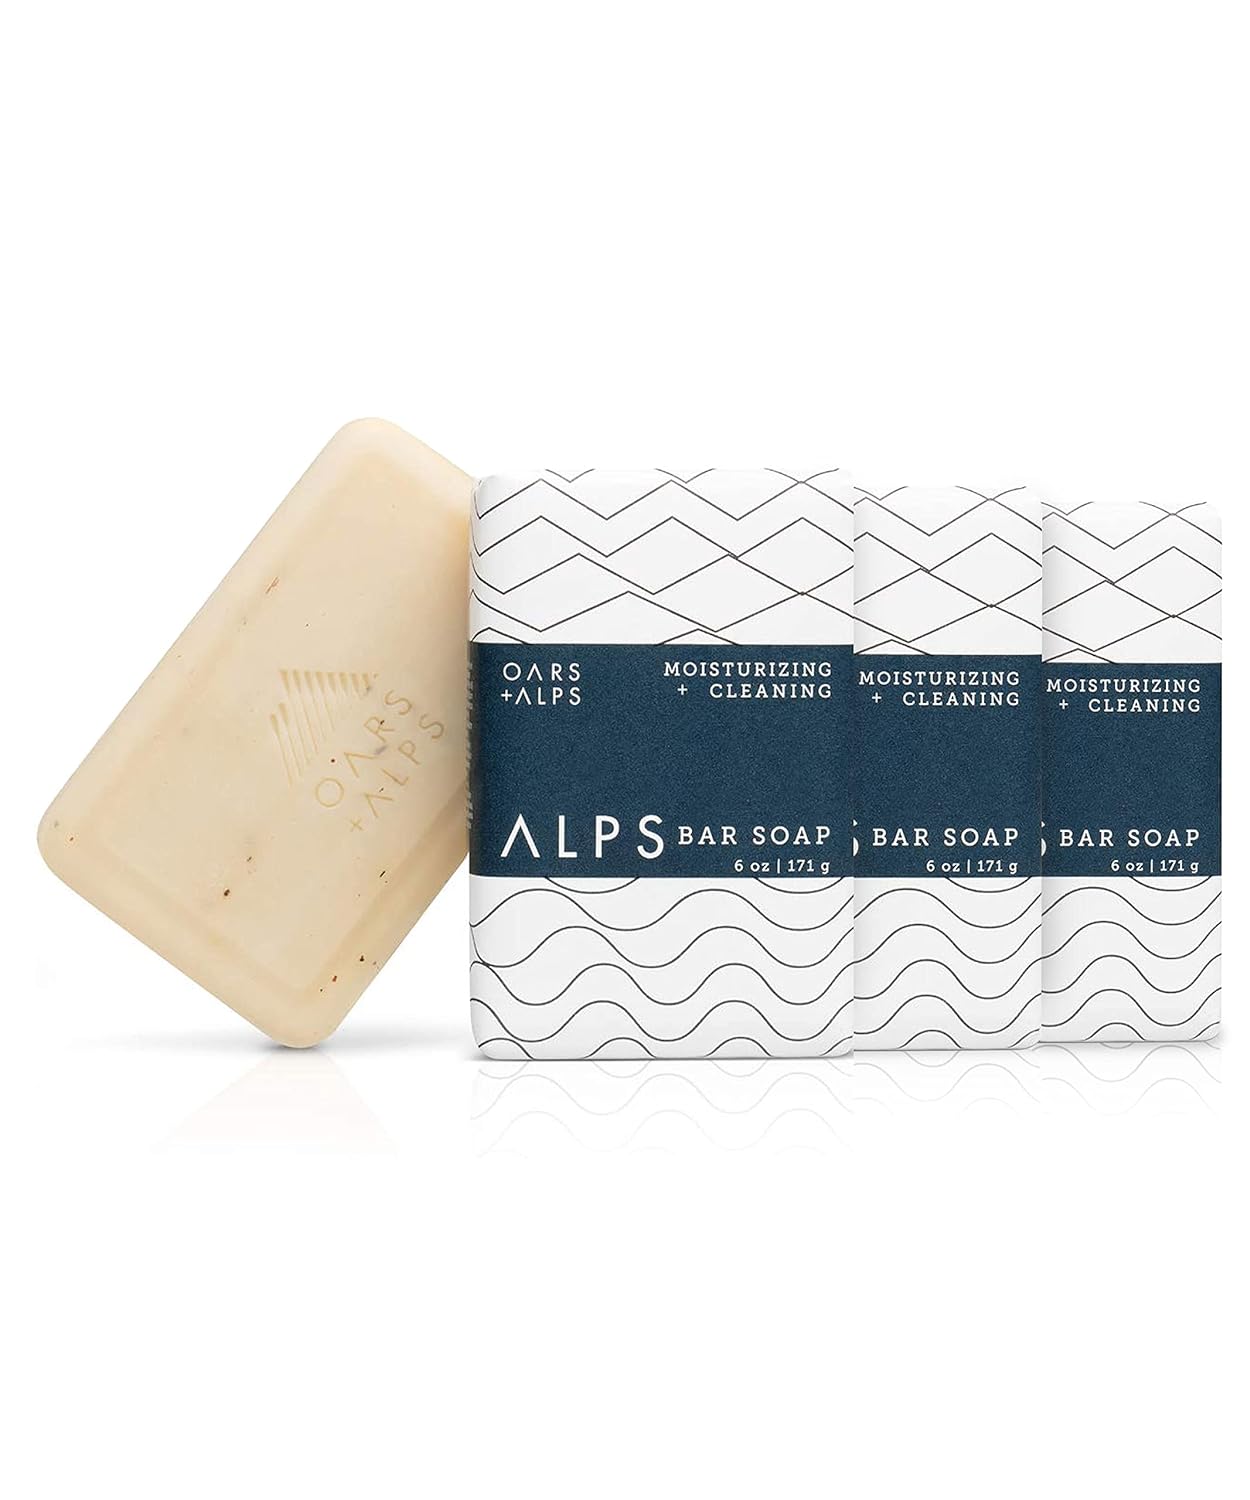 Oars + Alps Moisturizing Men's Bar Soap, Dermatologist Tested and Made with Clean Ingredients, Travel Size, 3 Pack, 6 Oz Each